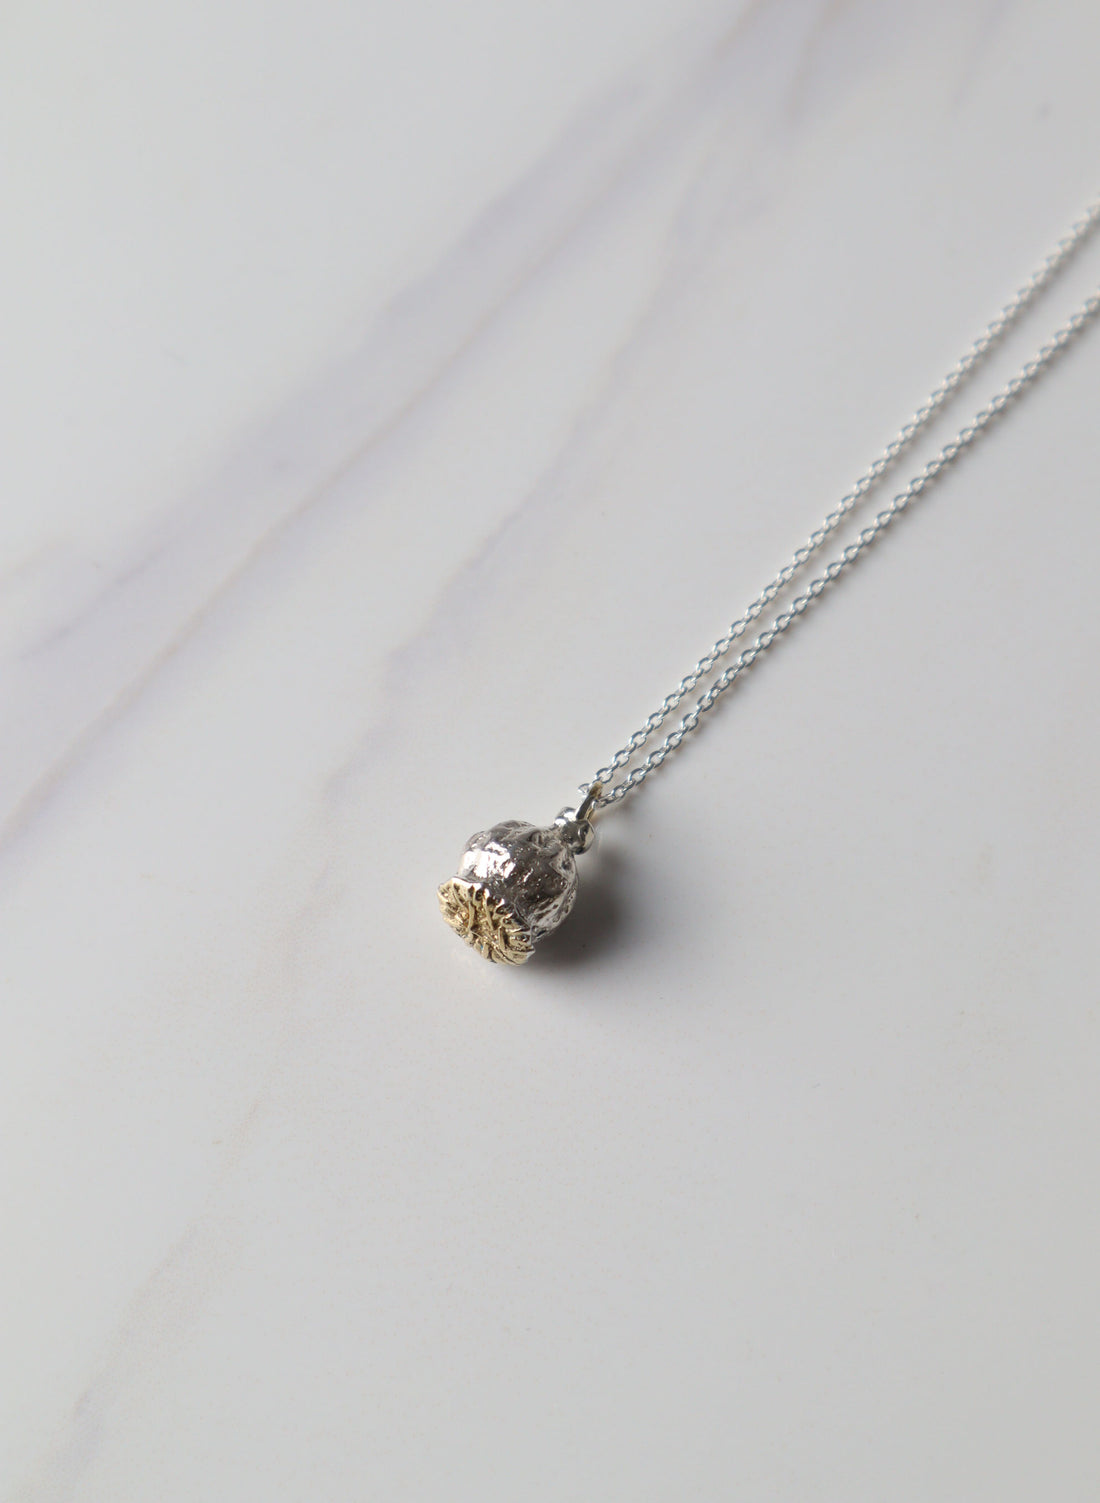 ANZAC Poppy Necklace - Stirling Silver and Gold Plate